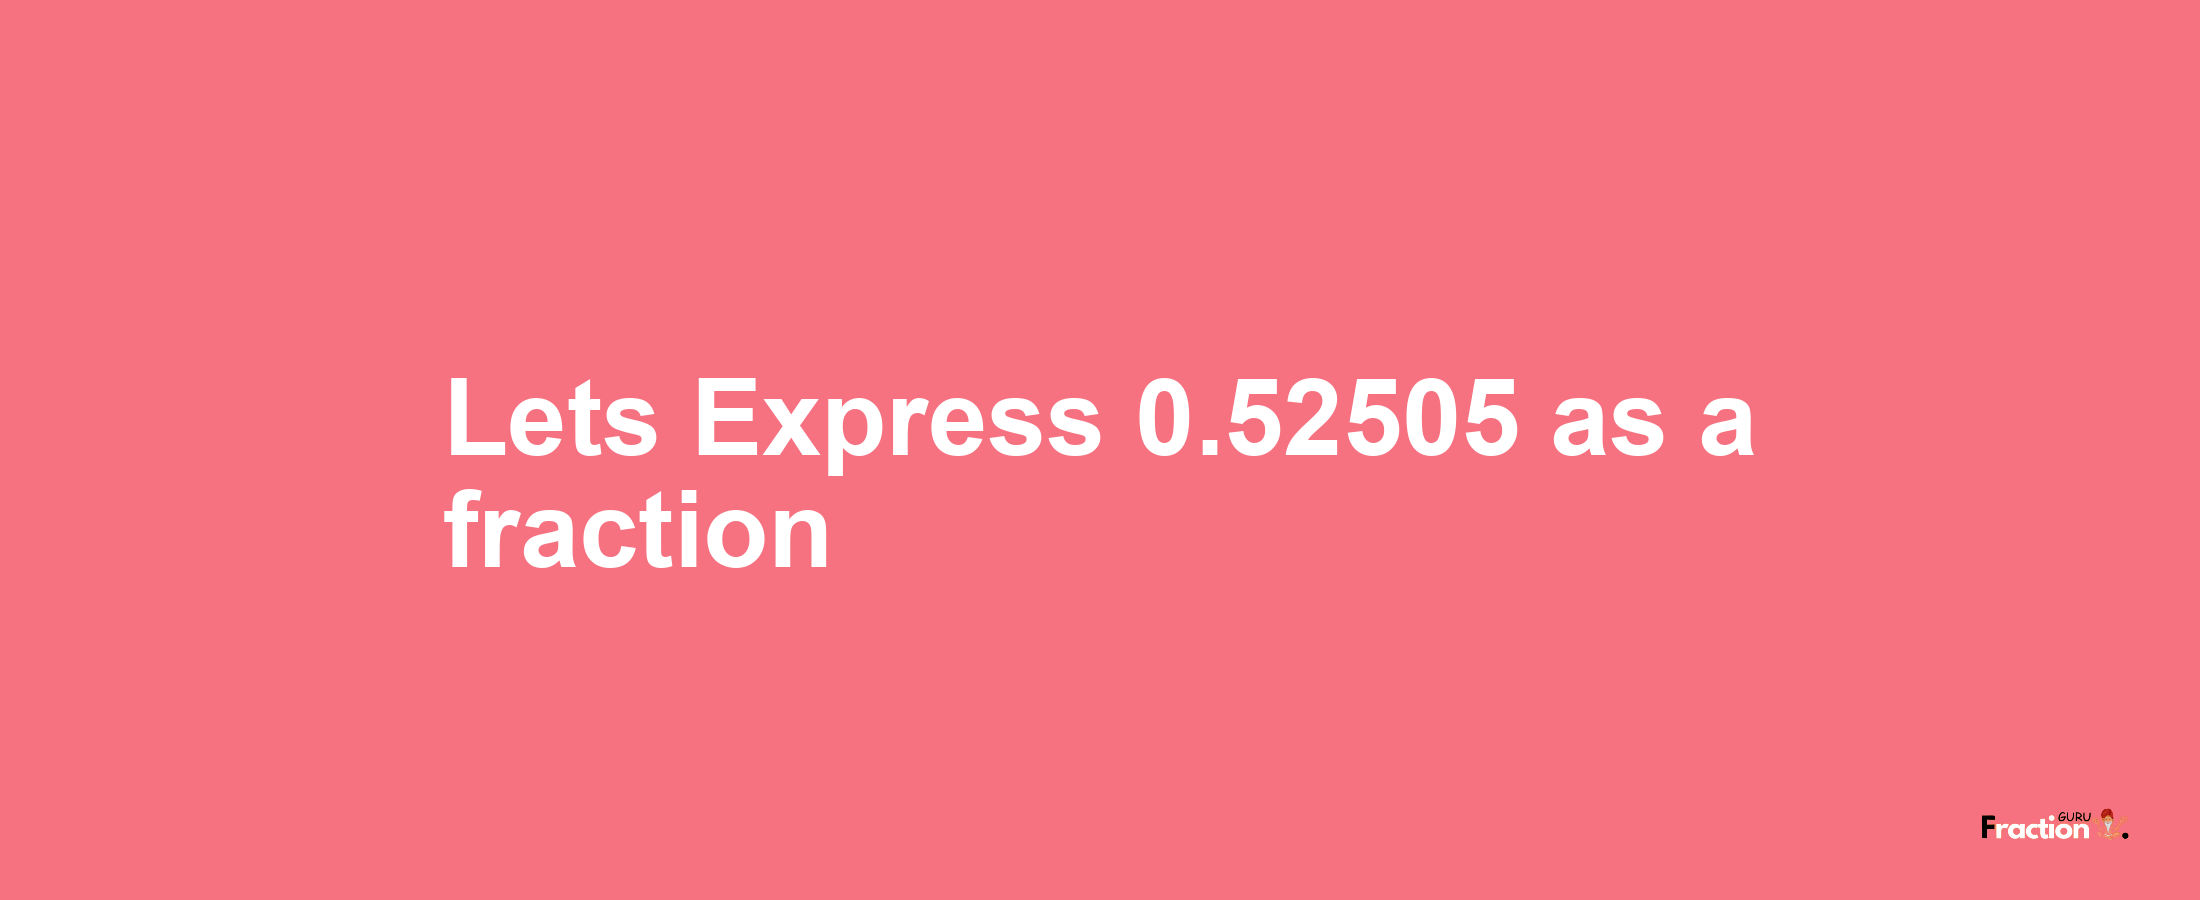 Lets Express 0.52505 as afraction